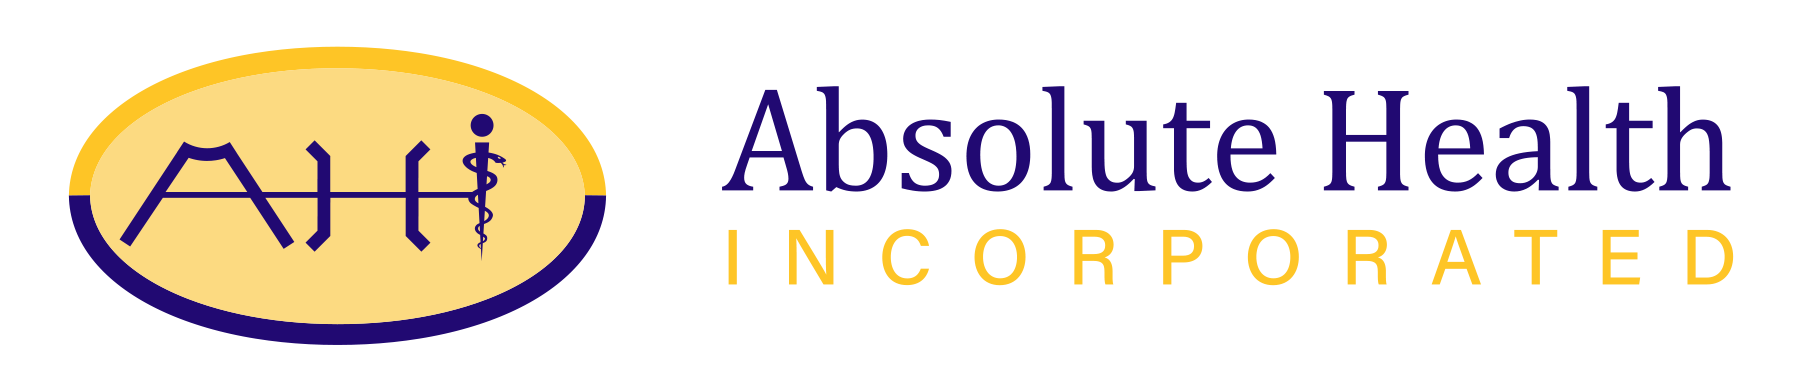 Absolute Health Incorporated